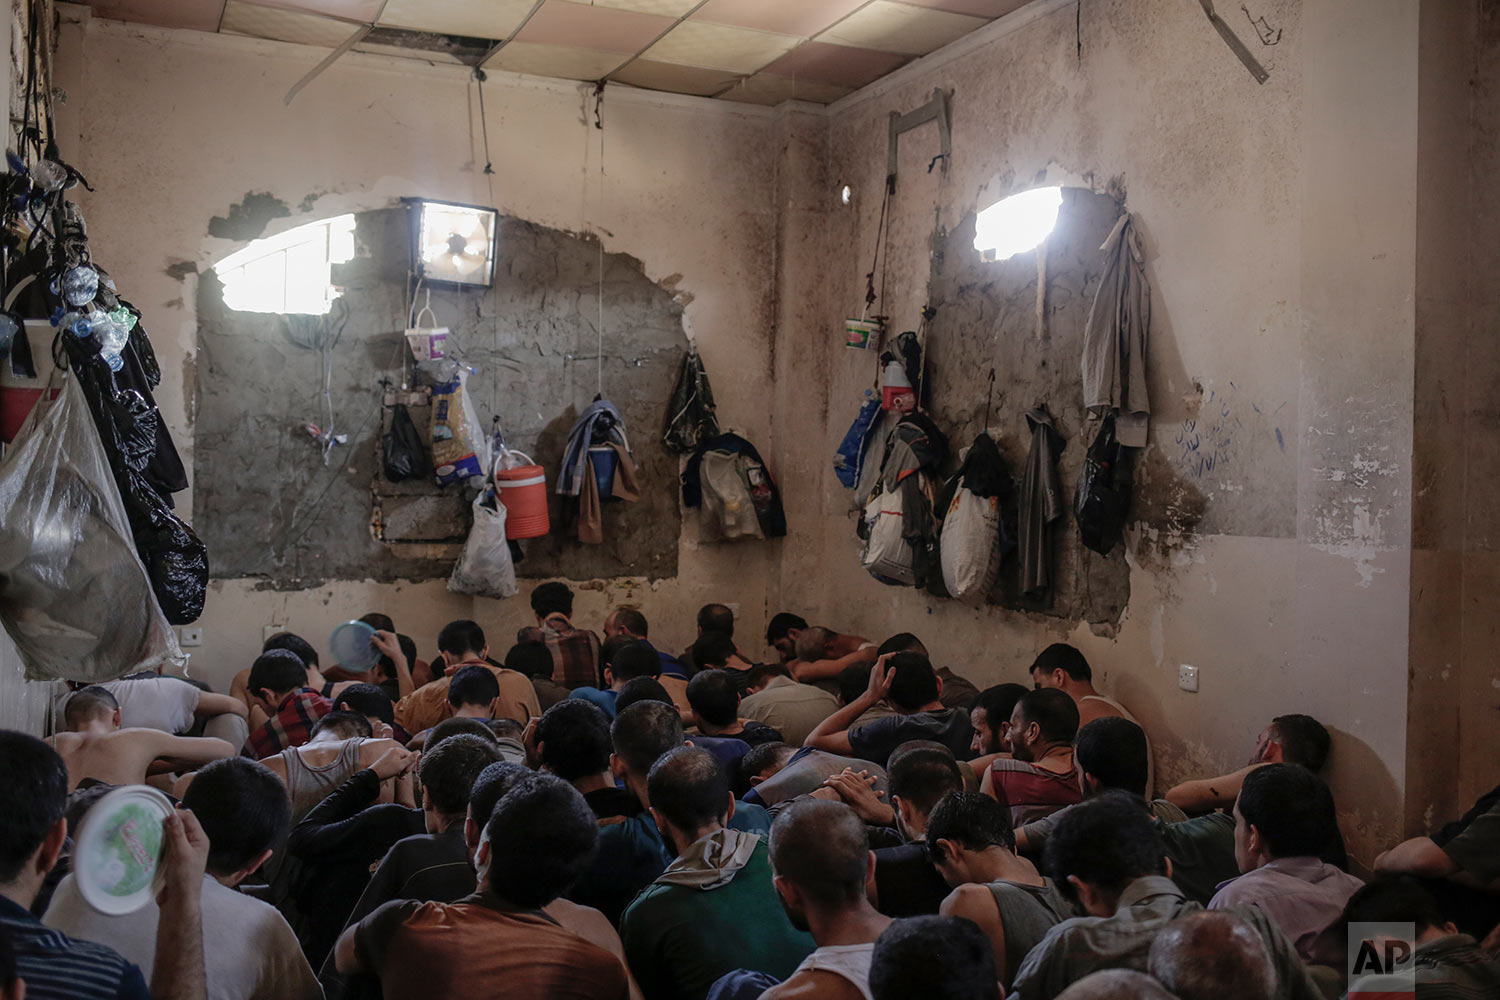  More than 100 Islamic State suspects sit inside a small room in a prison south of Mosul, Tuesday, July 18, 2017. A total of more 370 IS suspects are being held in bad conditions in the prison. (AP Photo/Bram Janssen) 